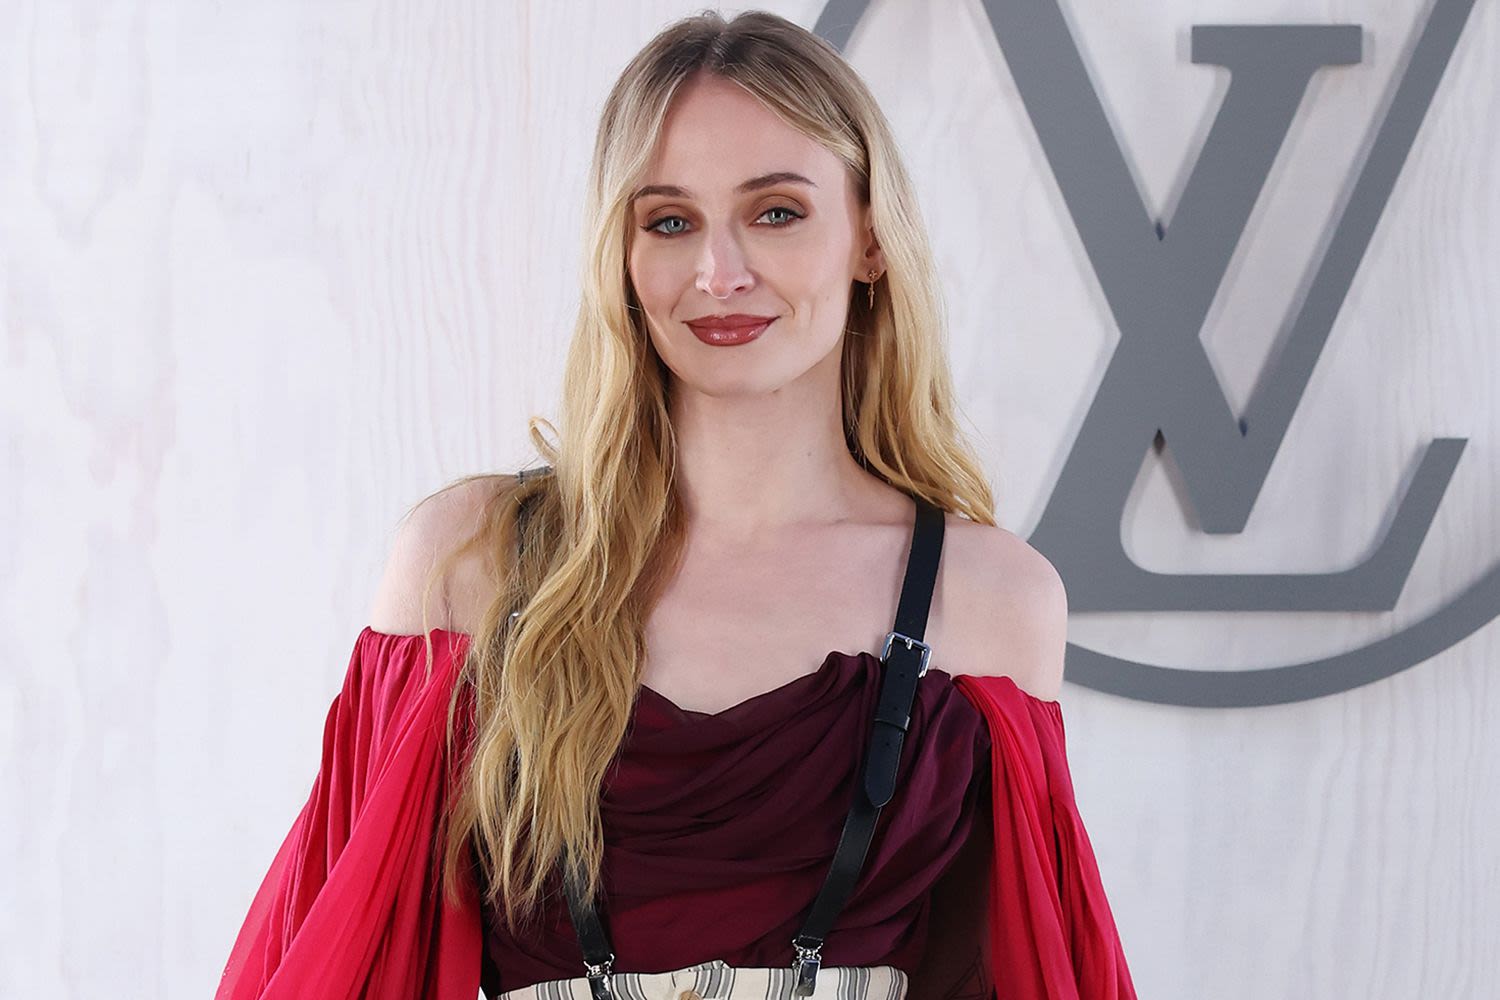 Sophie Turner Says She Used to Struggle with Anxiety and Depression for 'Days, Weeks': Now 'I Pick Up the Phone to My Friends'